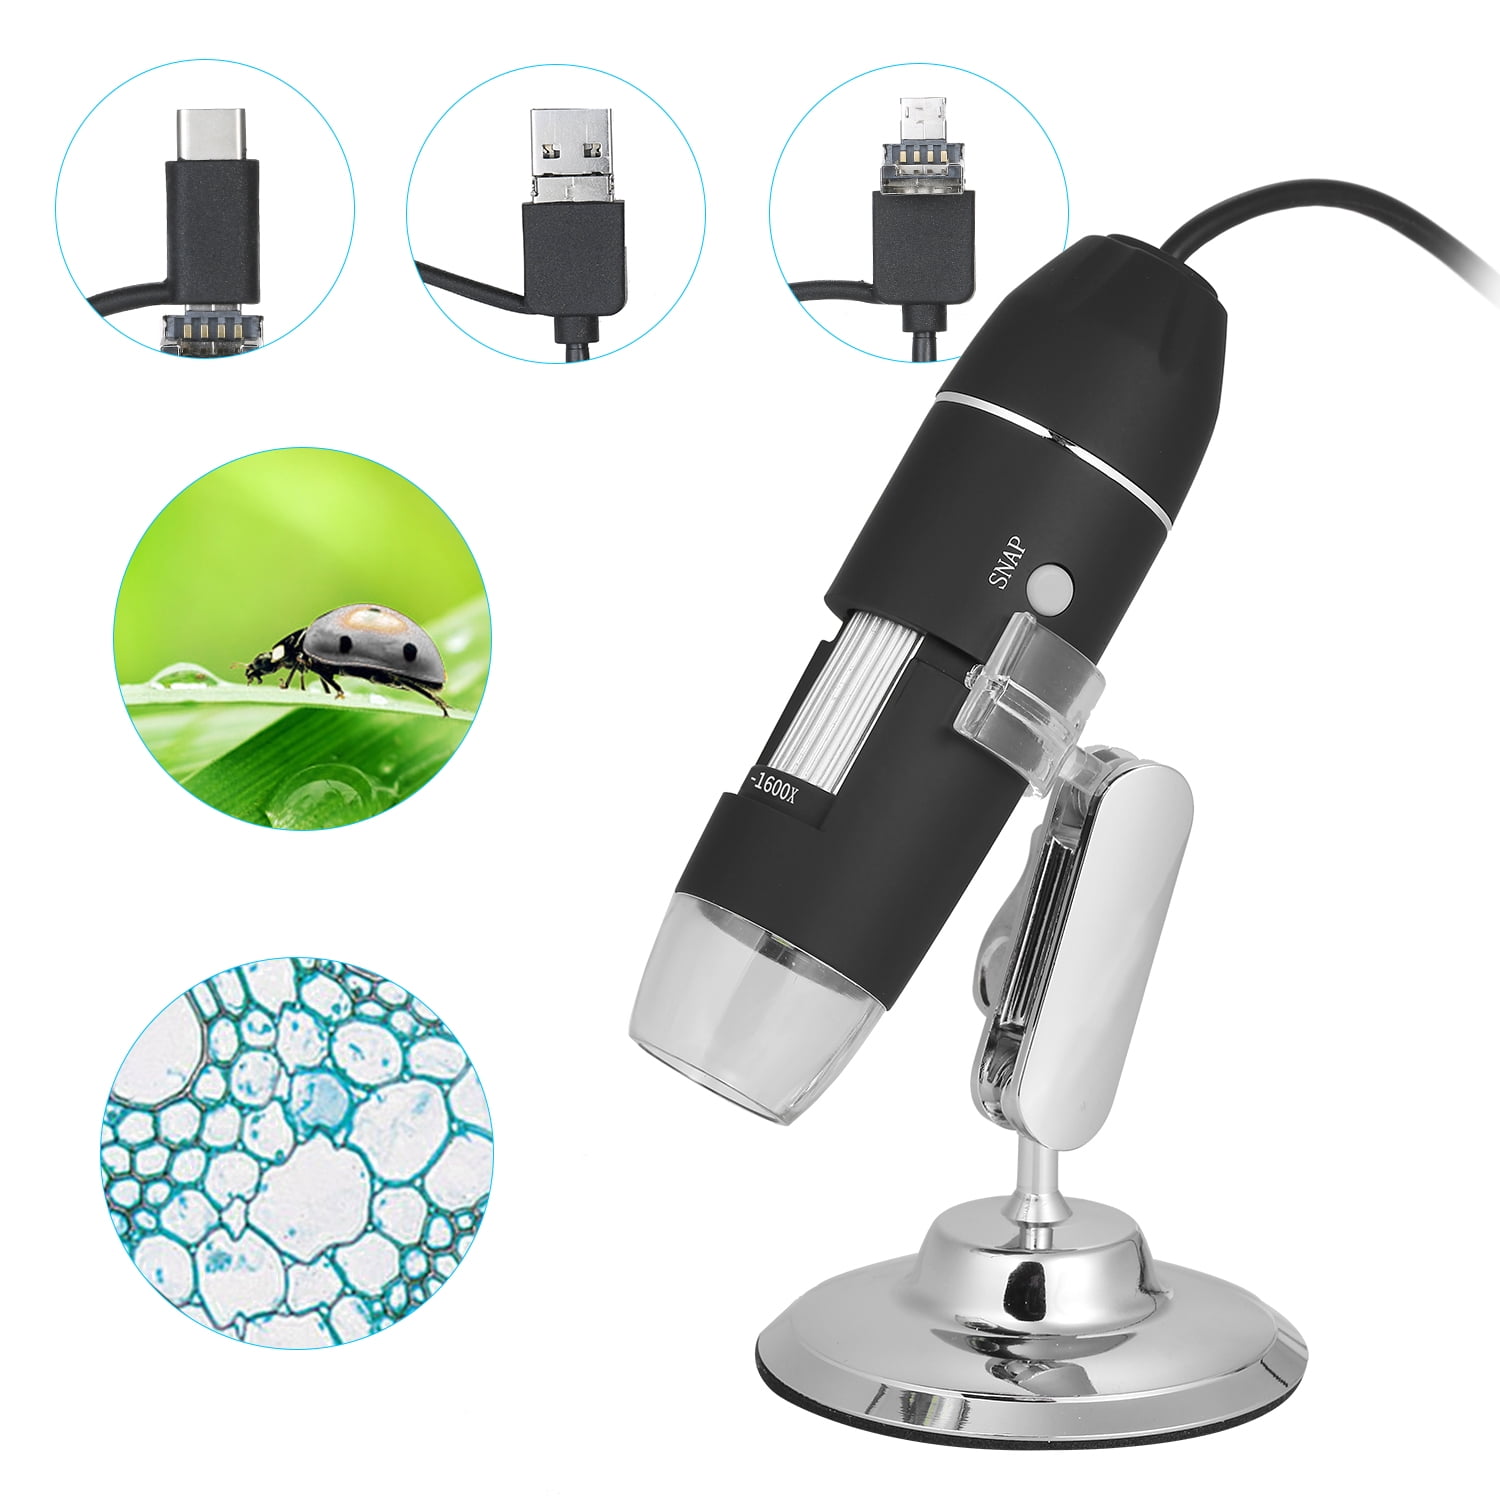 Oumefar Mini Portable Clip-on Microscope with 60-100X Magnification for Observation in The Office 